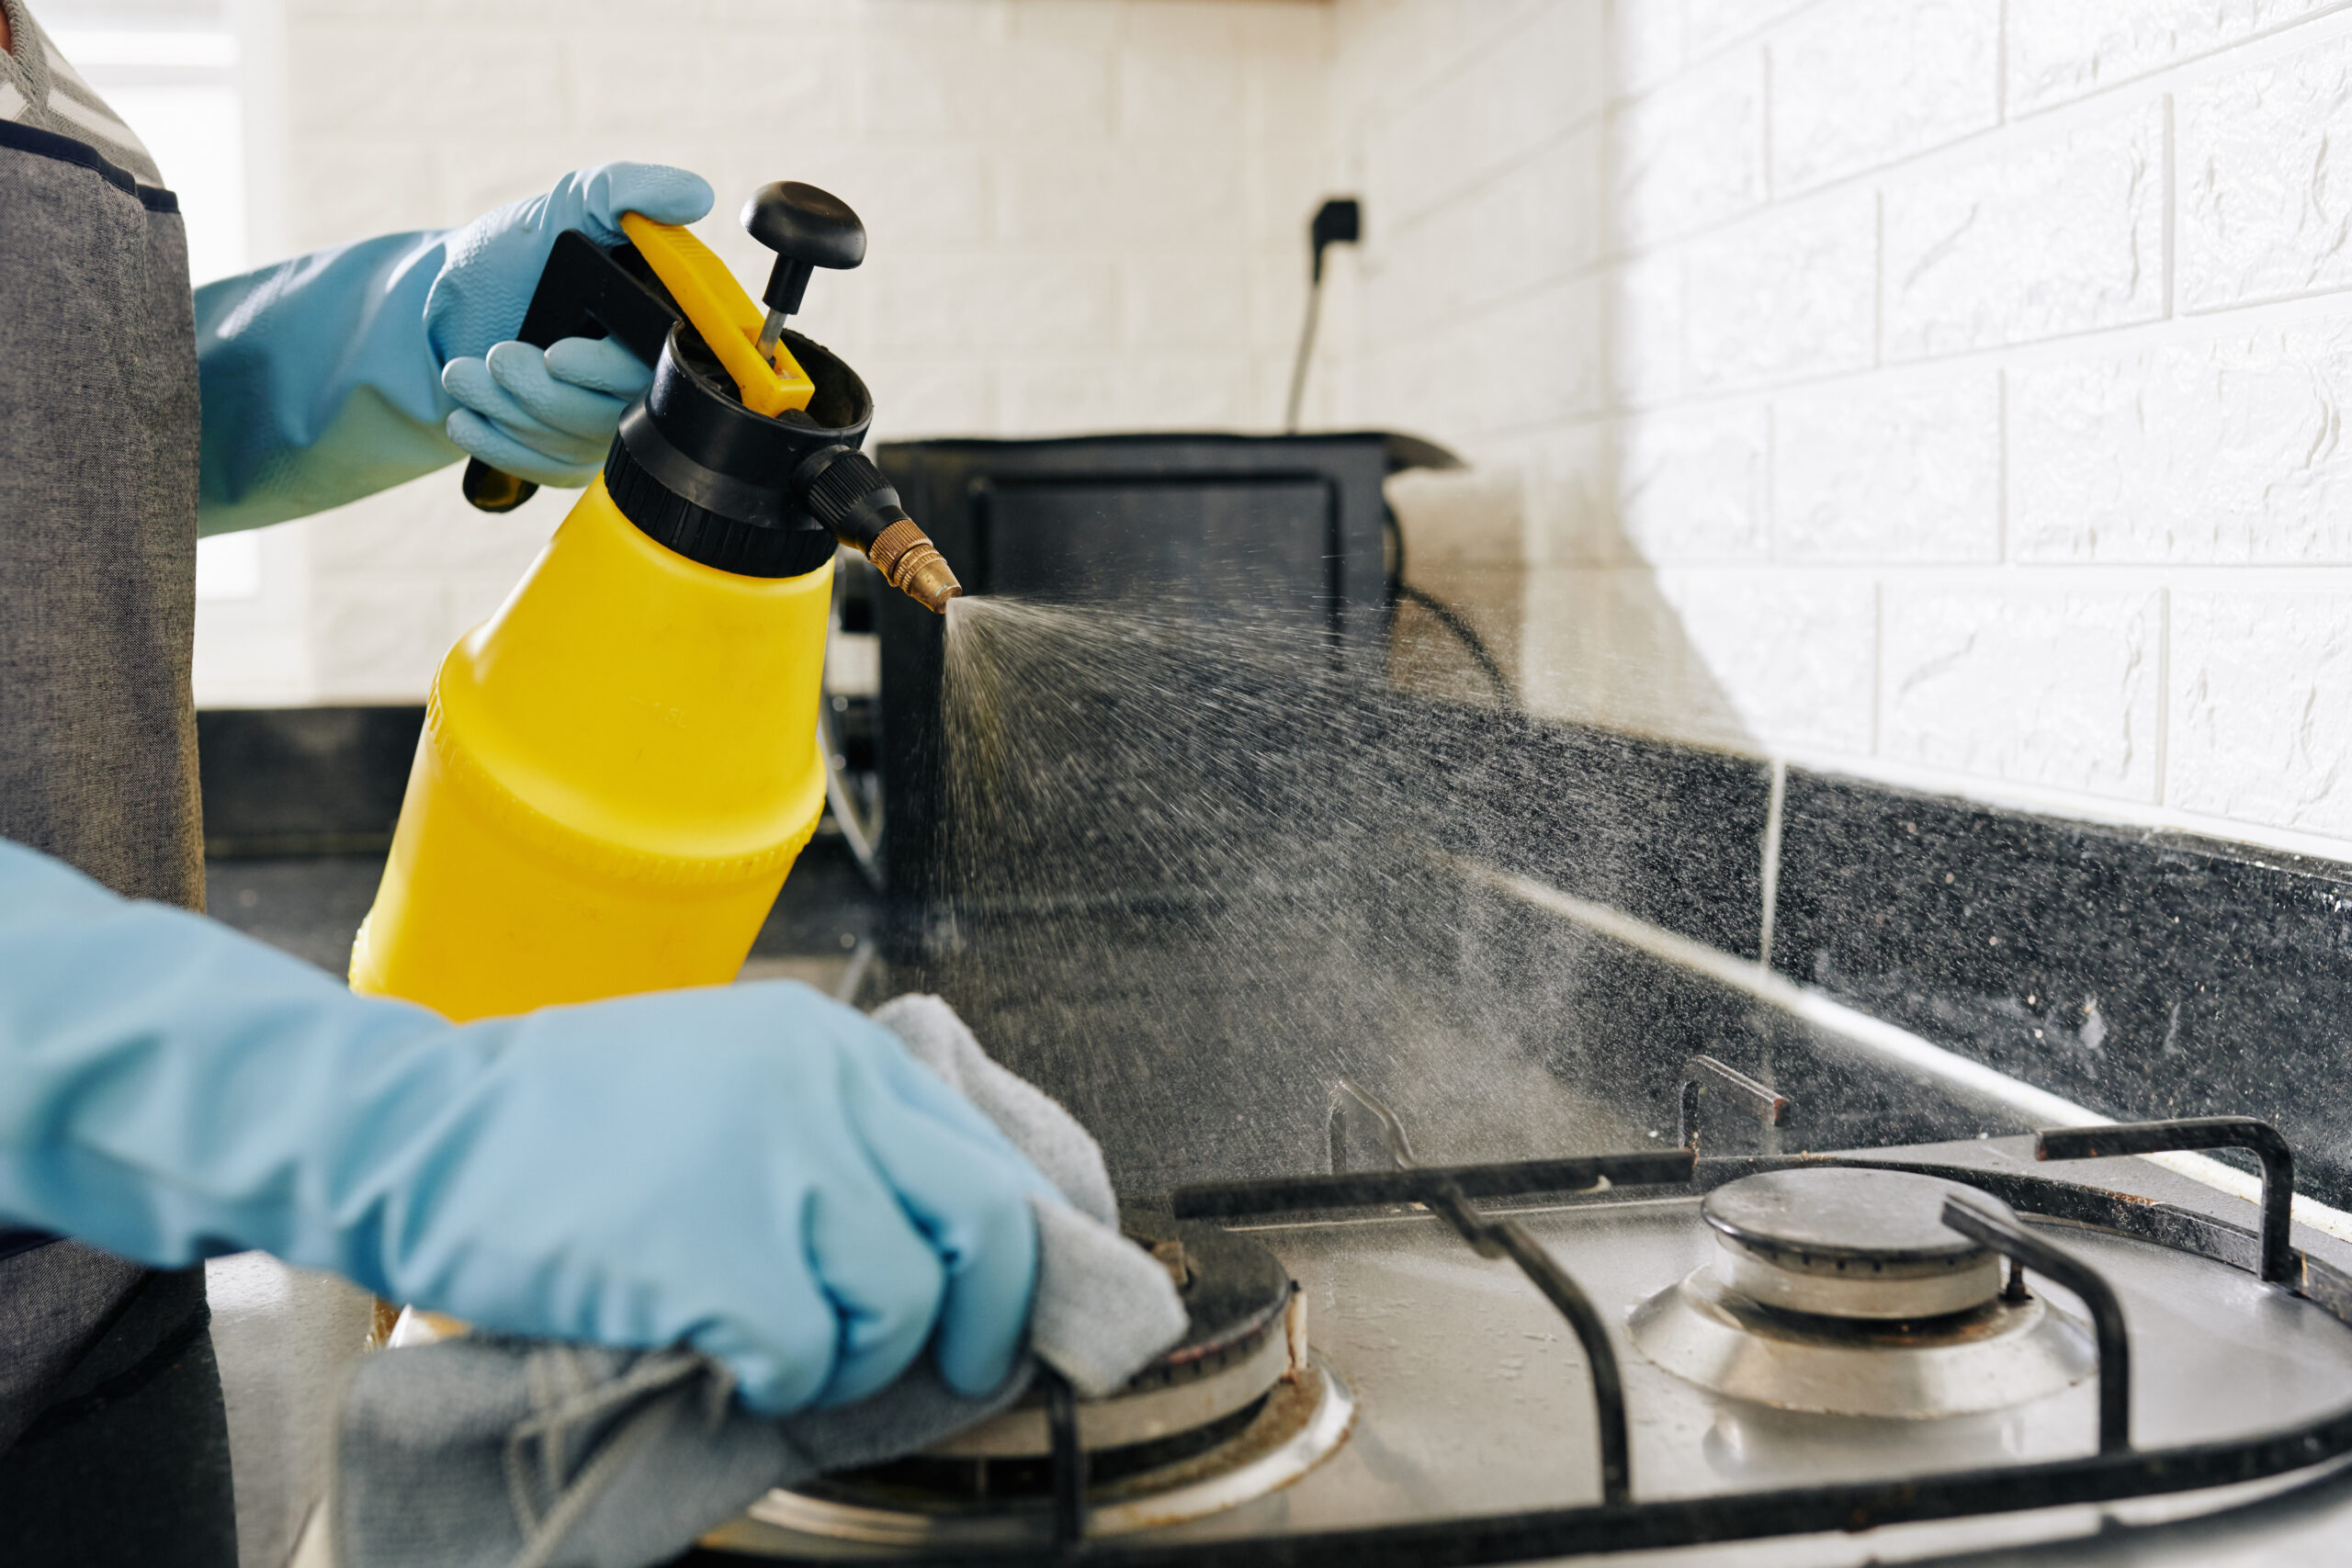 What is professional kitchen cleaning? – Coronavirus special